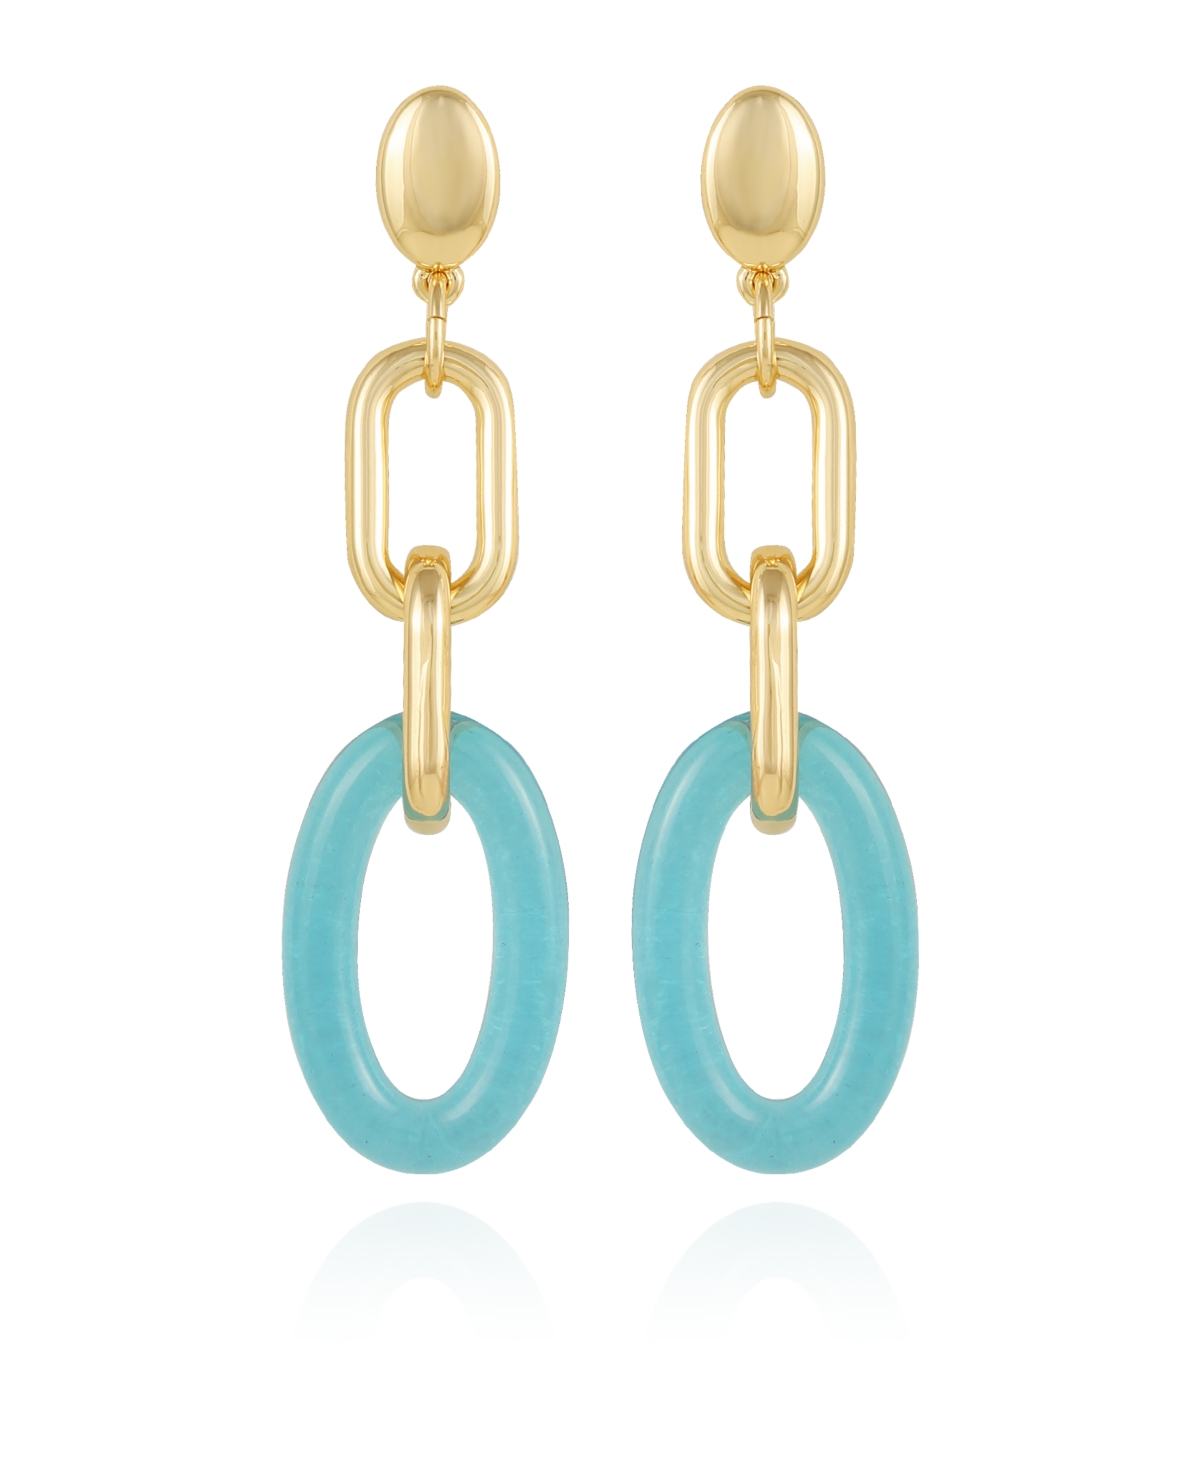 Gold-Tone and Blue Interlocking Link Drop Earrings - Gold-Tone, Blue